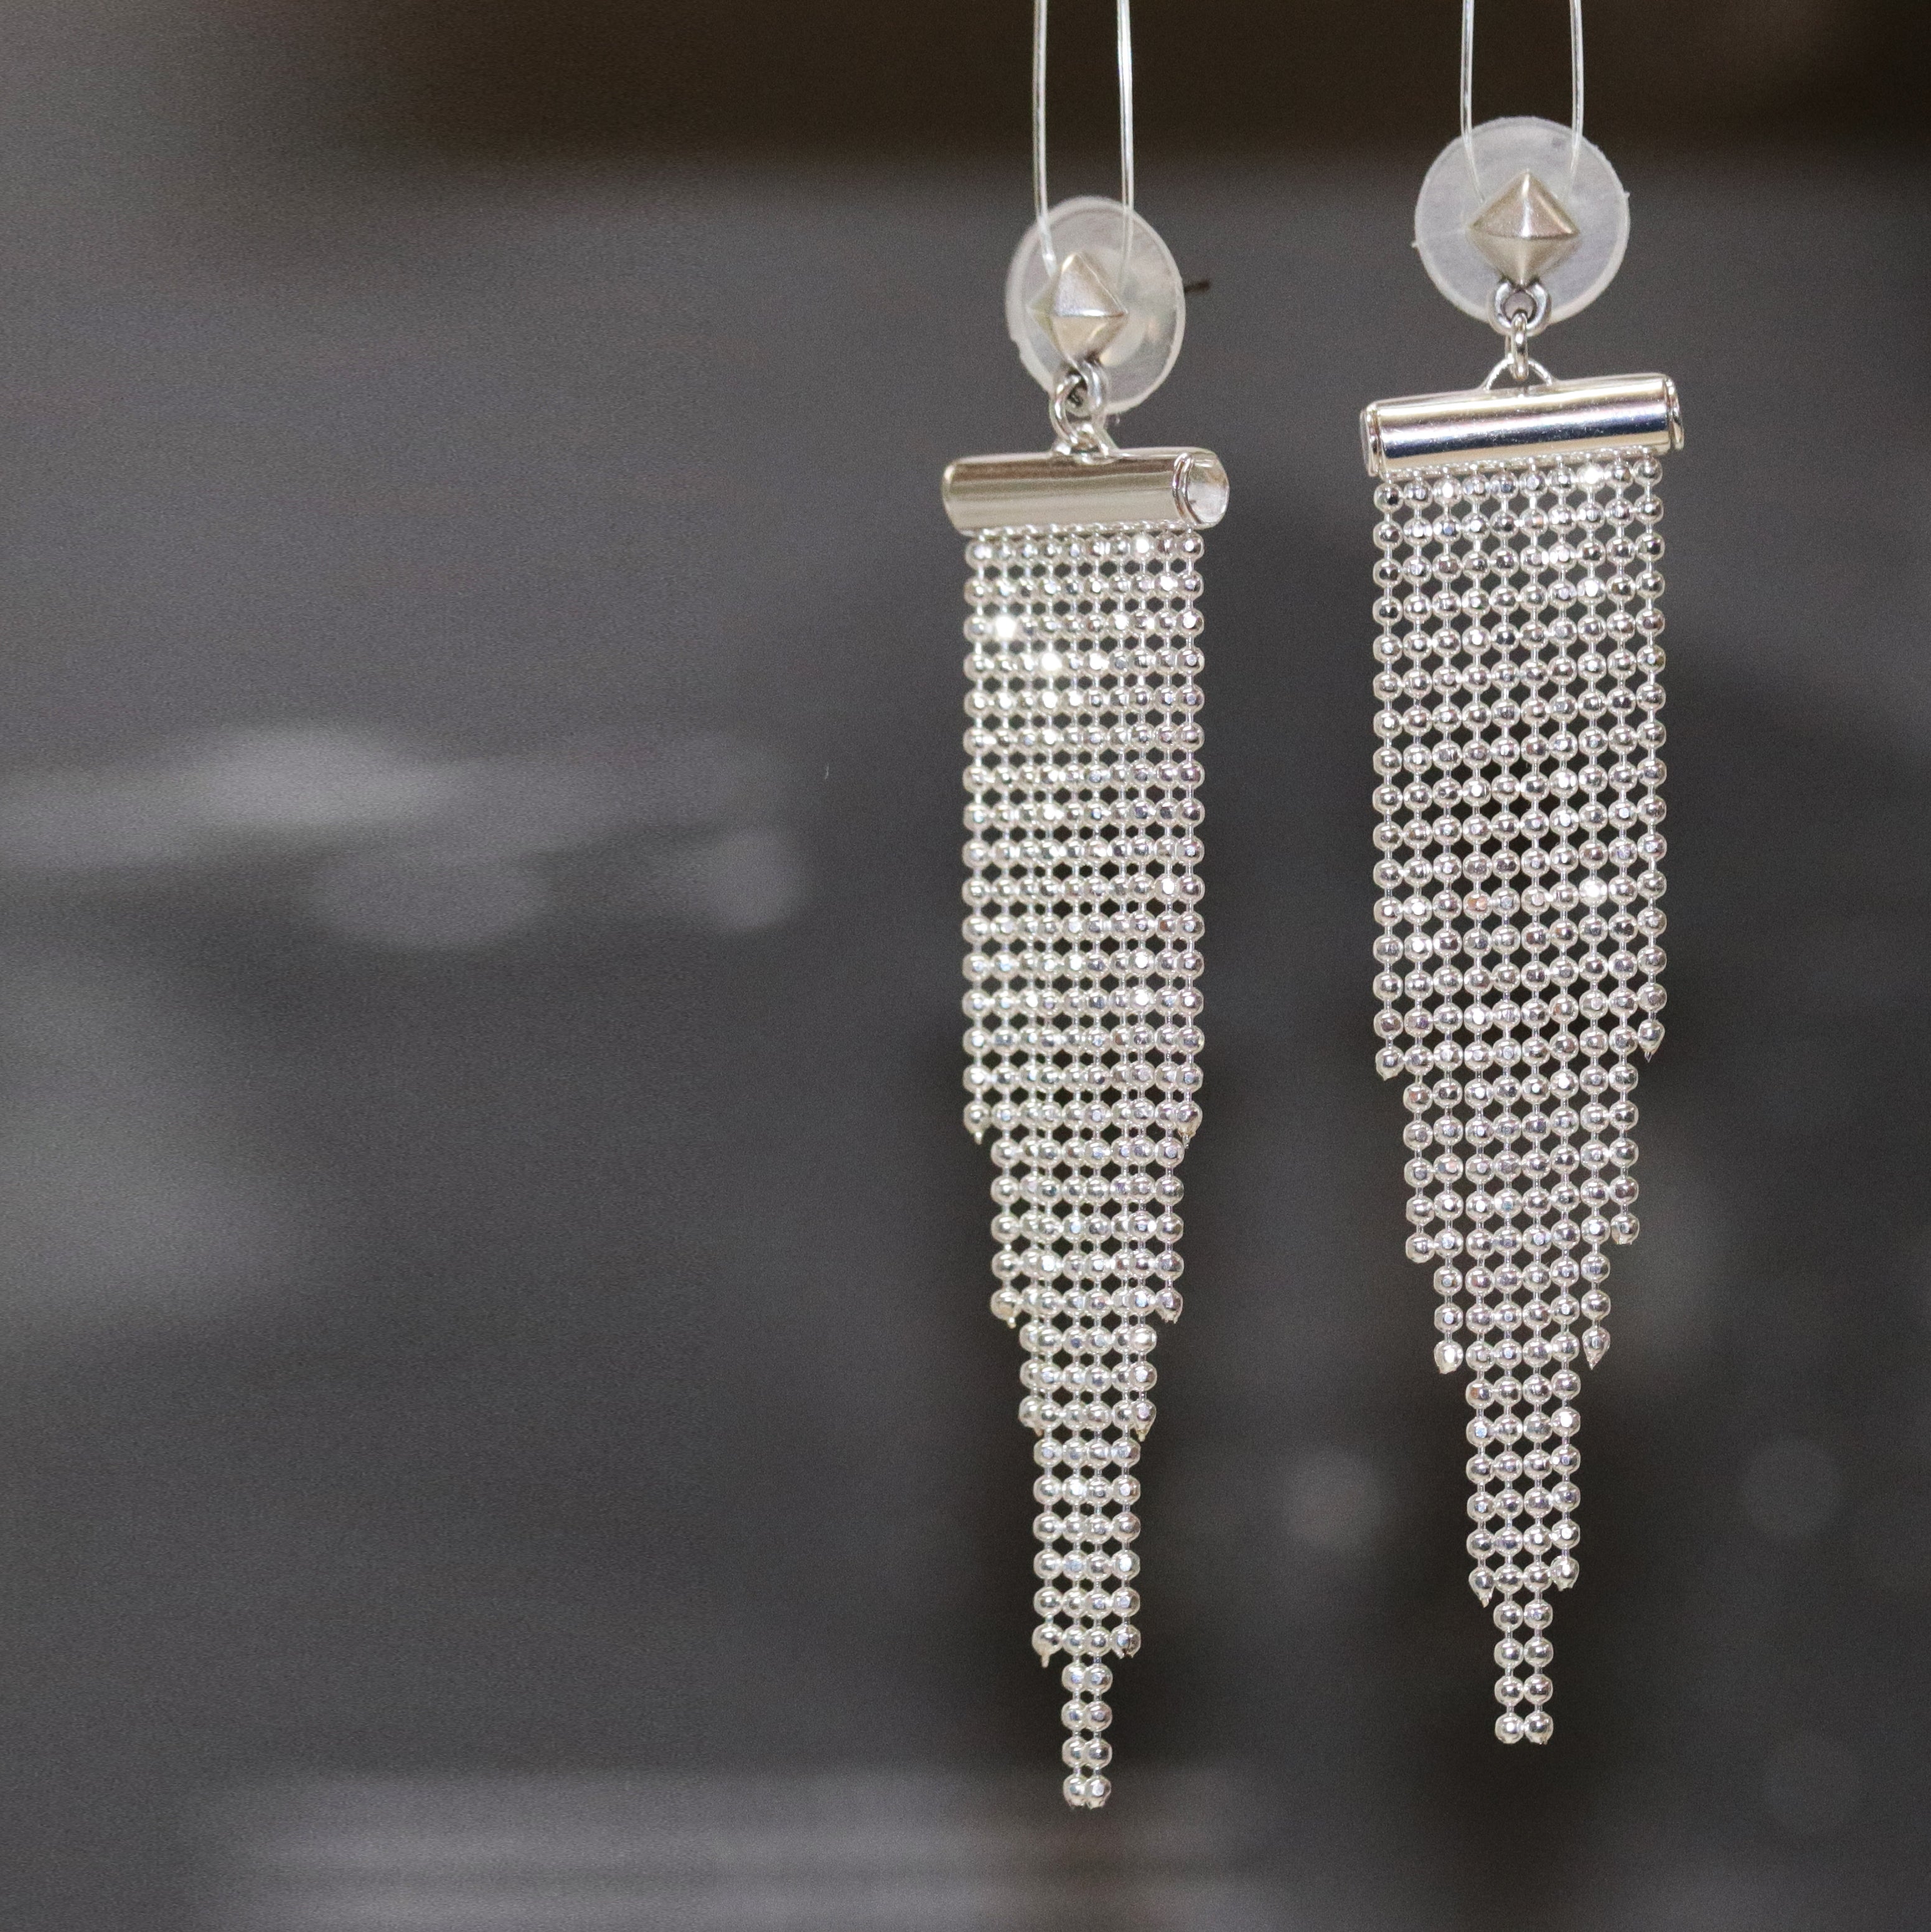 DIY Silver Fringe Earrings with Ball Chain - Goody Beads